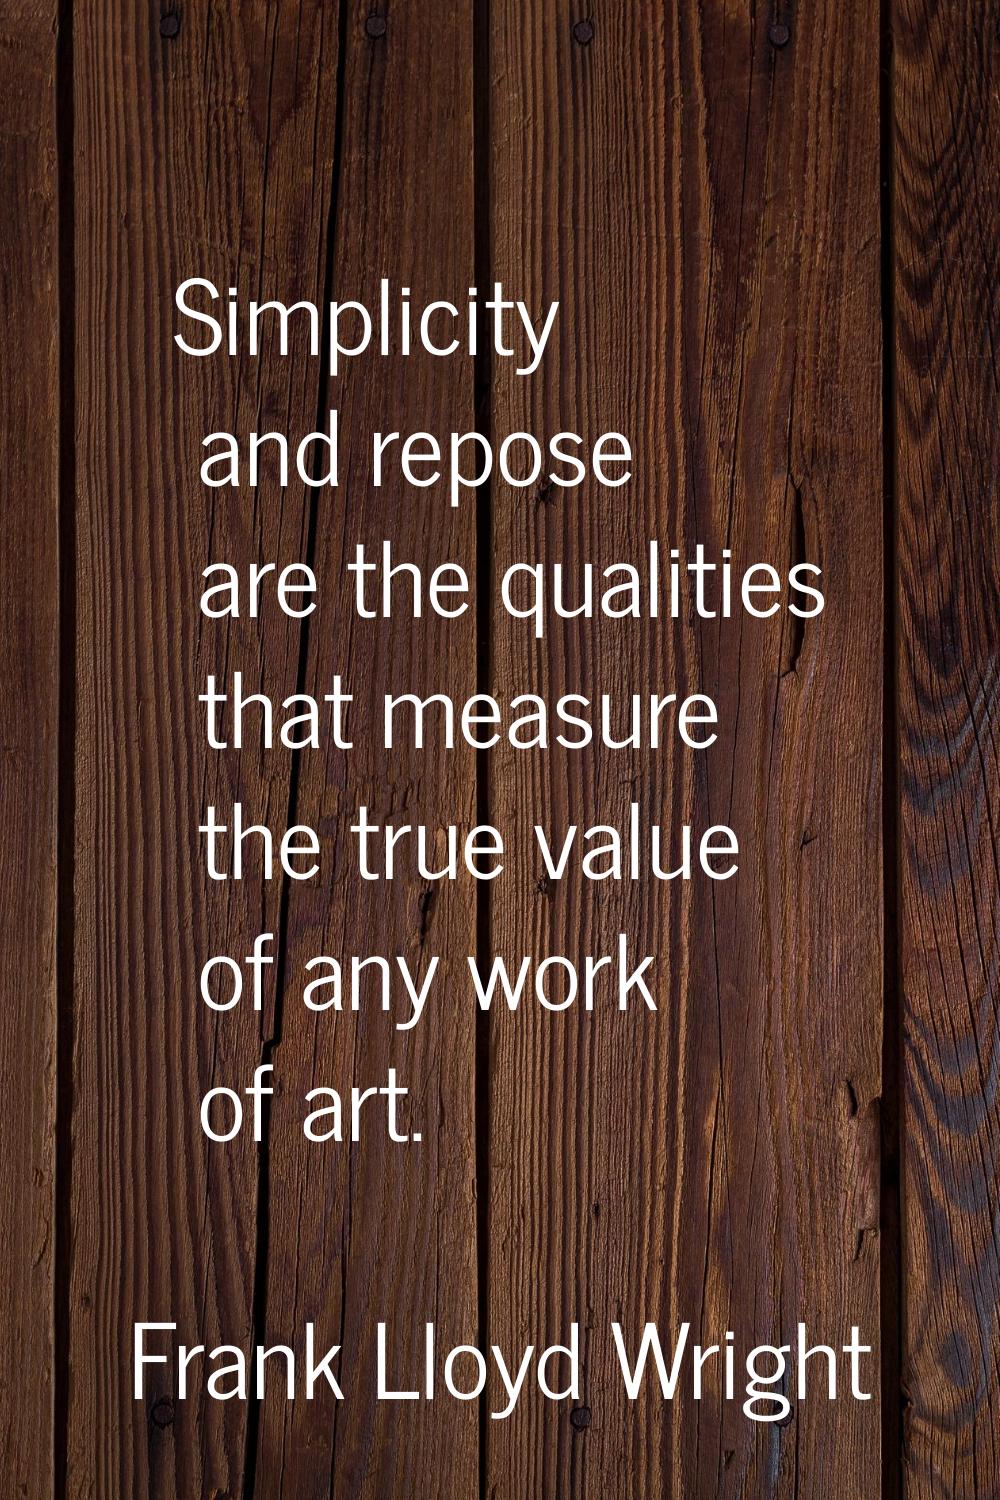 Simplicity and repose are the qualities that measure the true value of any work of art.